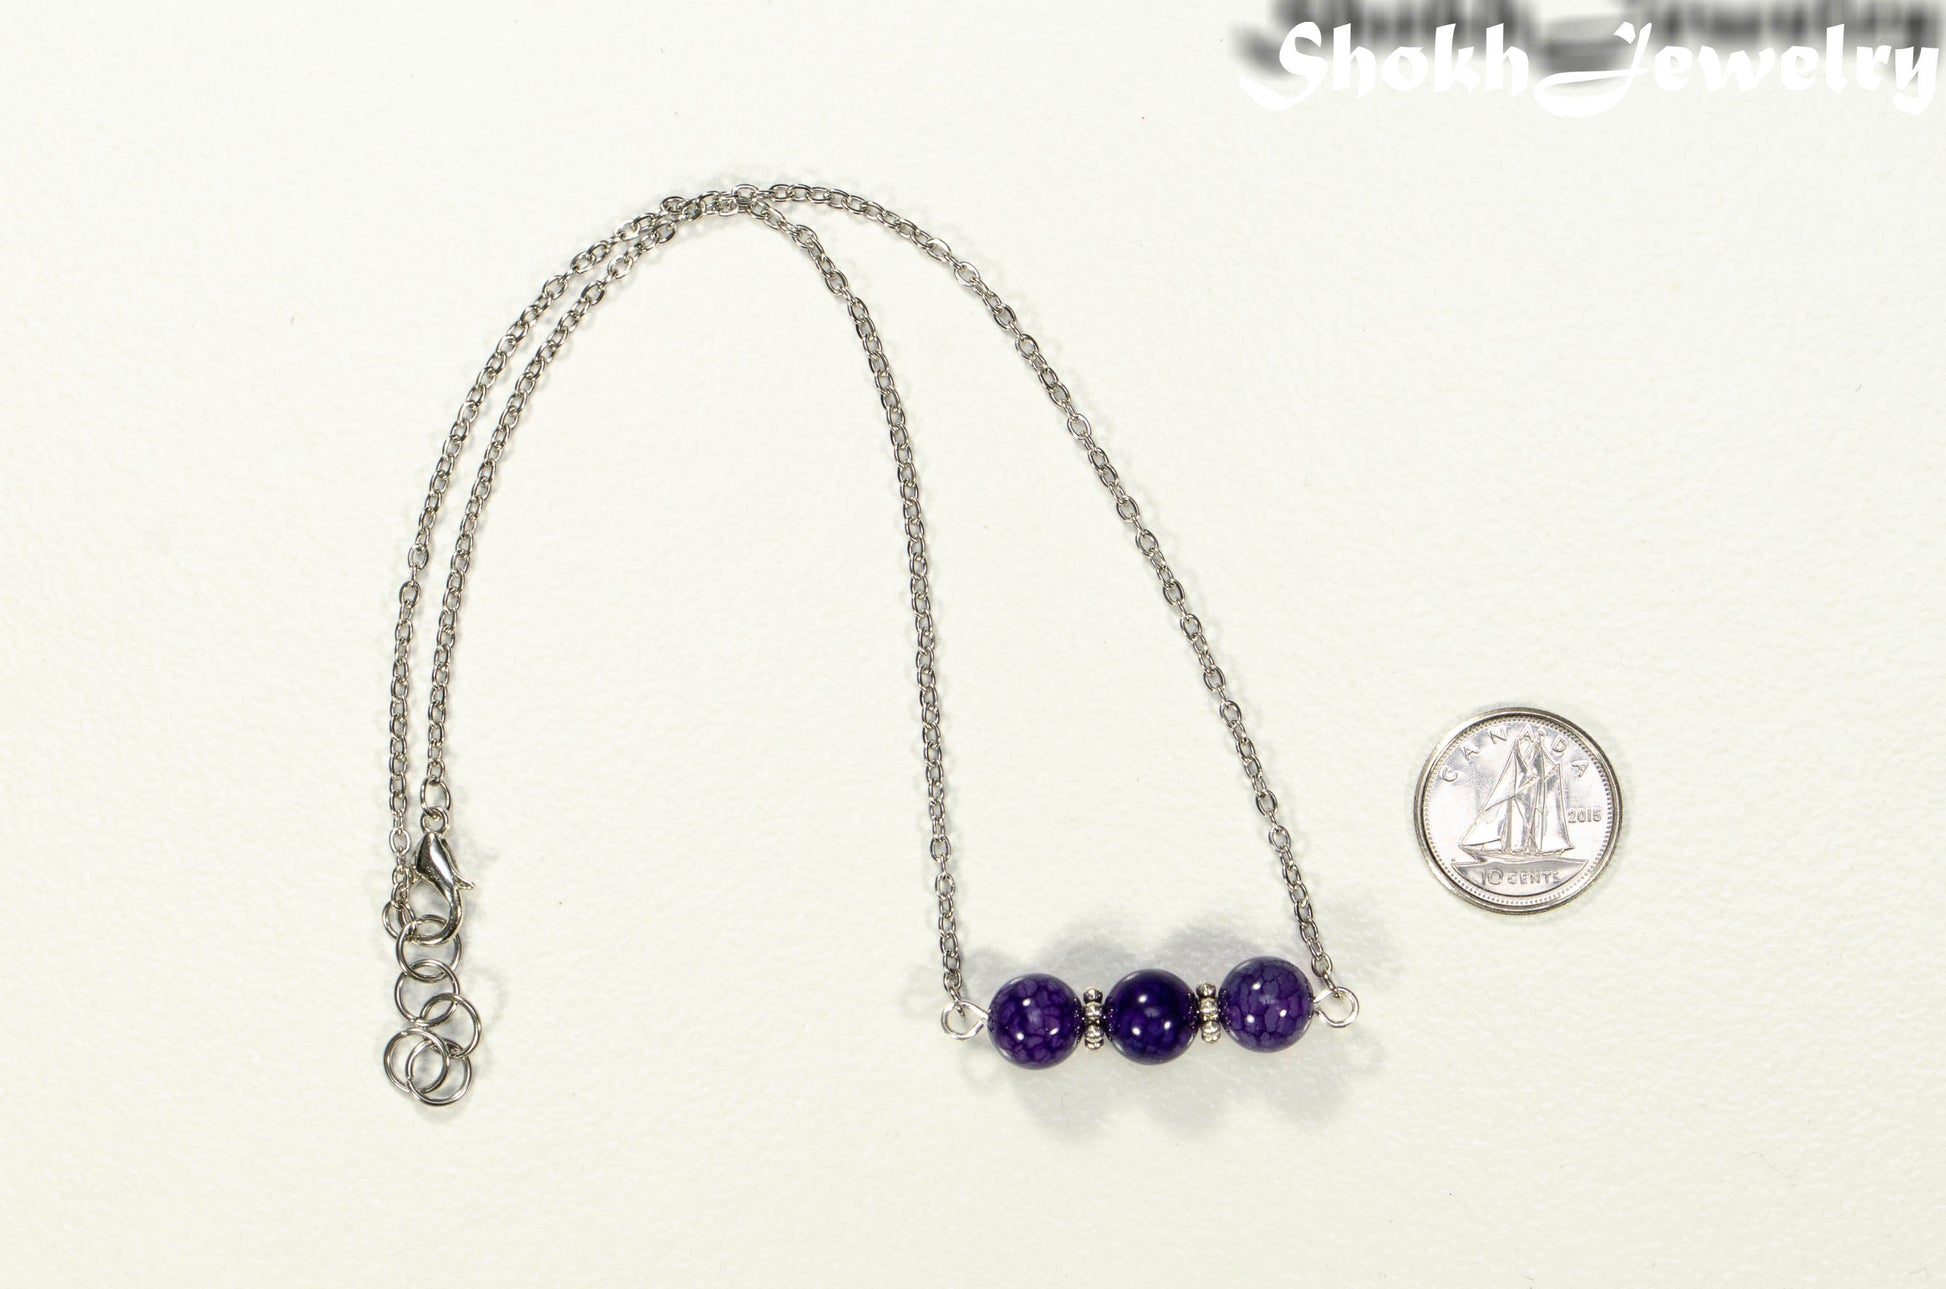 Purple Agate and Dainty Chain Choker Necklace beside a dime.